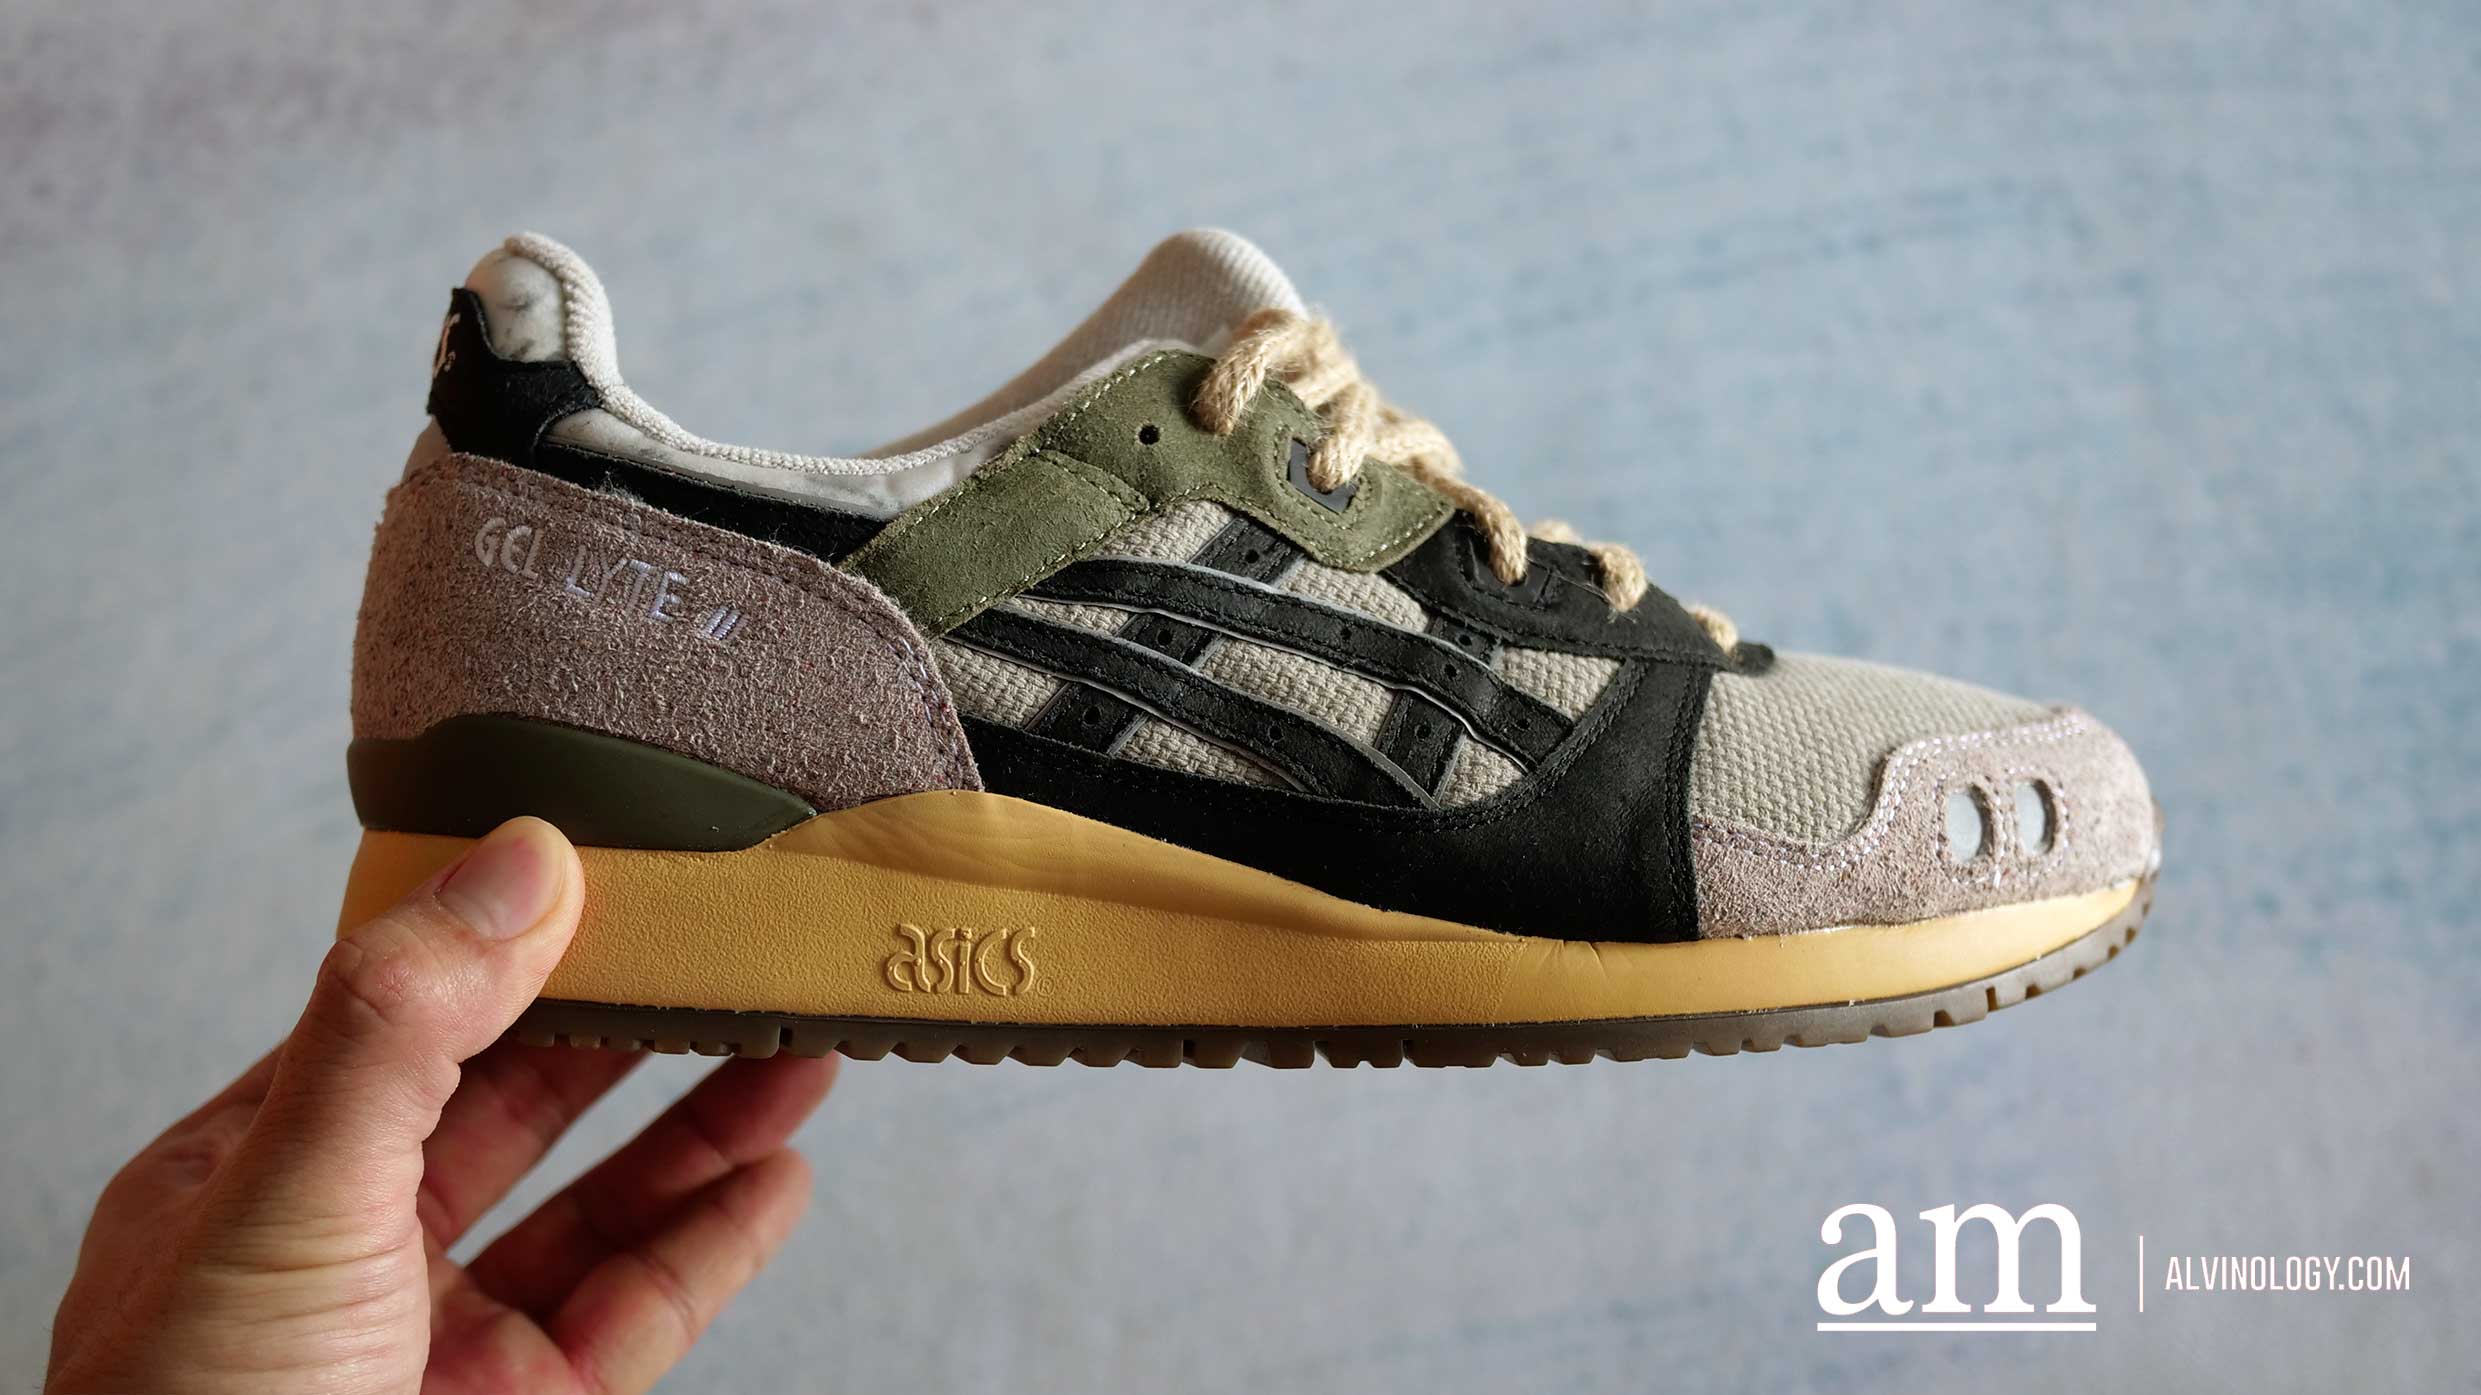 [Review] ASICS Sportsyle's Iconic Gel-Lyte III OG gets an eco-friendly ...